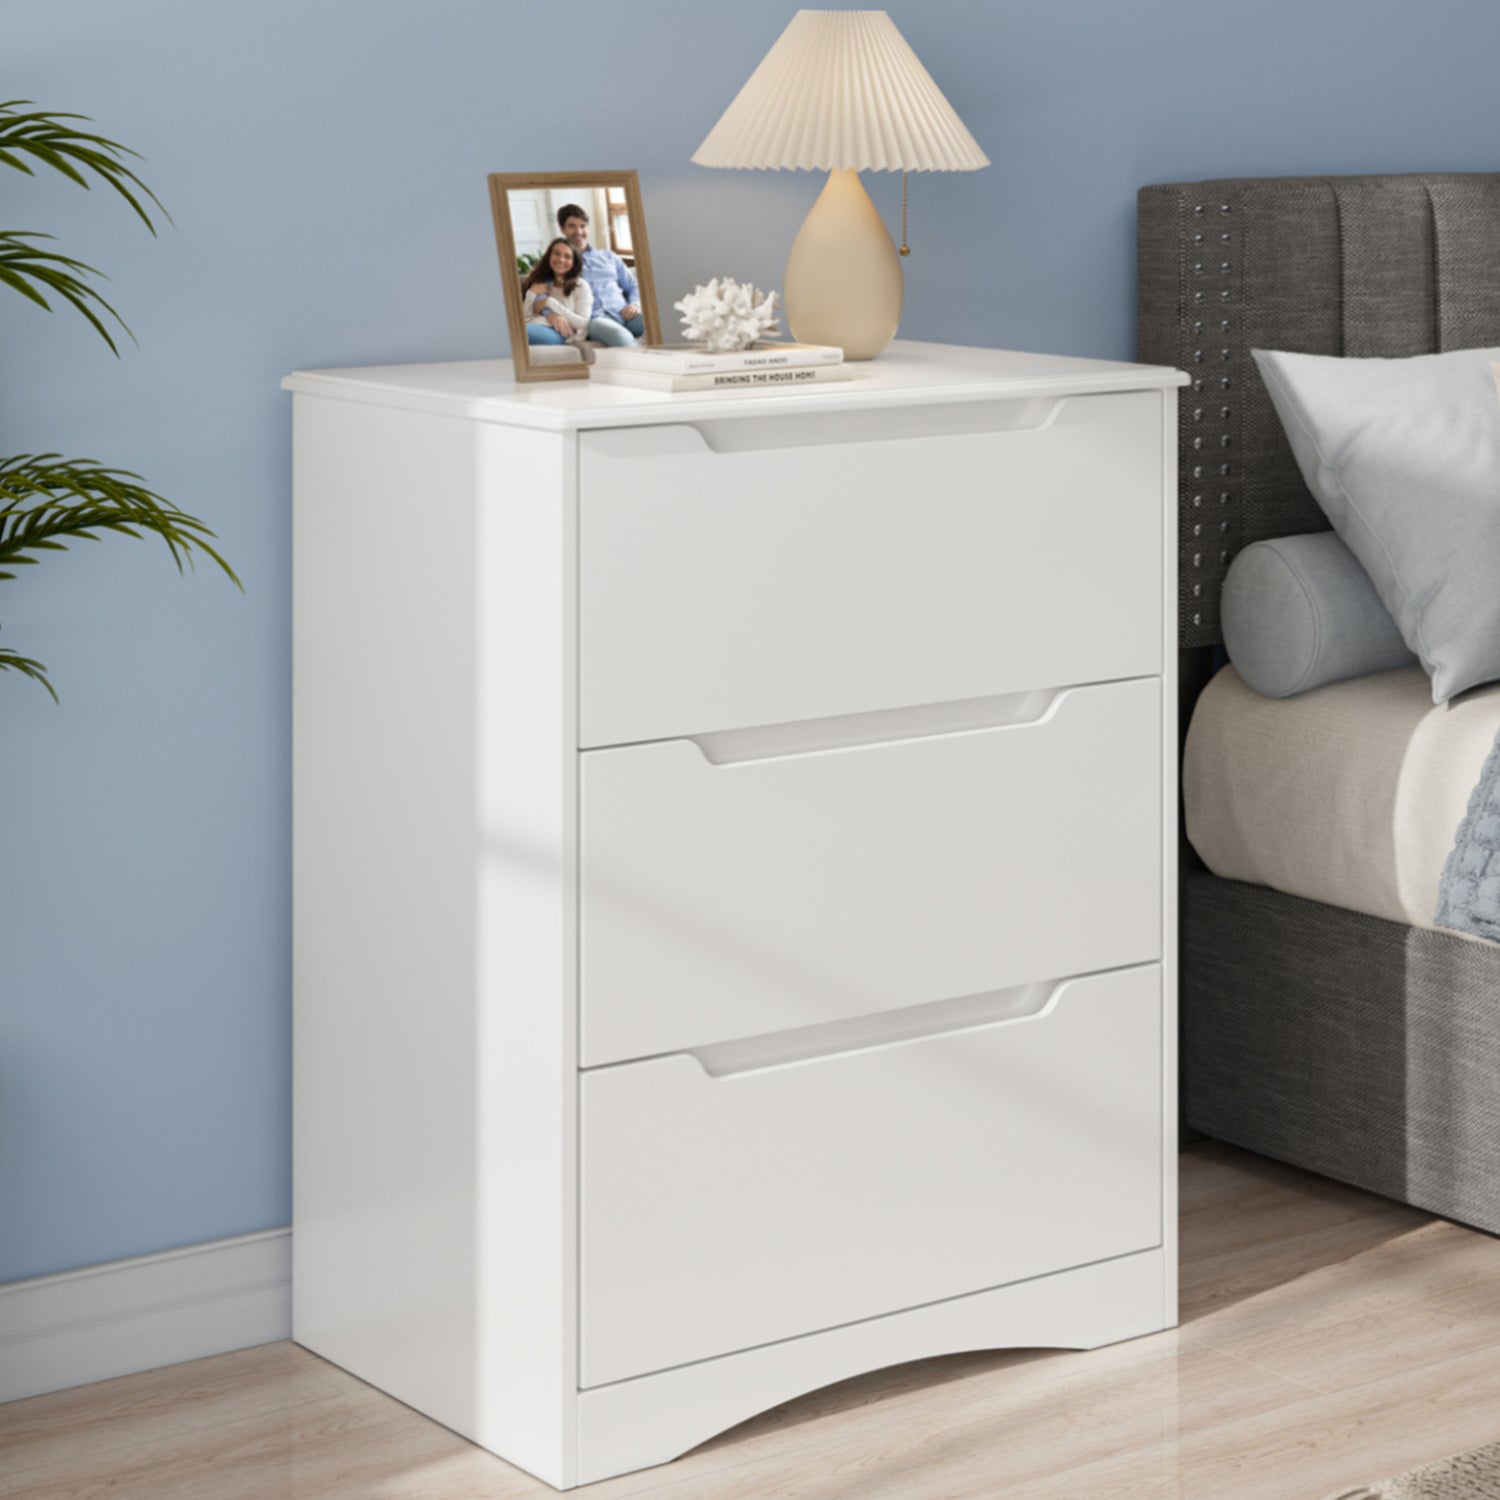 Gizoon AP21 3 Drawer Dresser, White Chest of Drawers with Large Storage Capacity